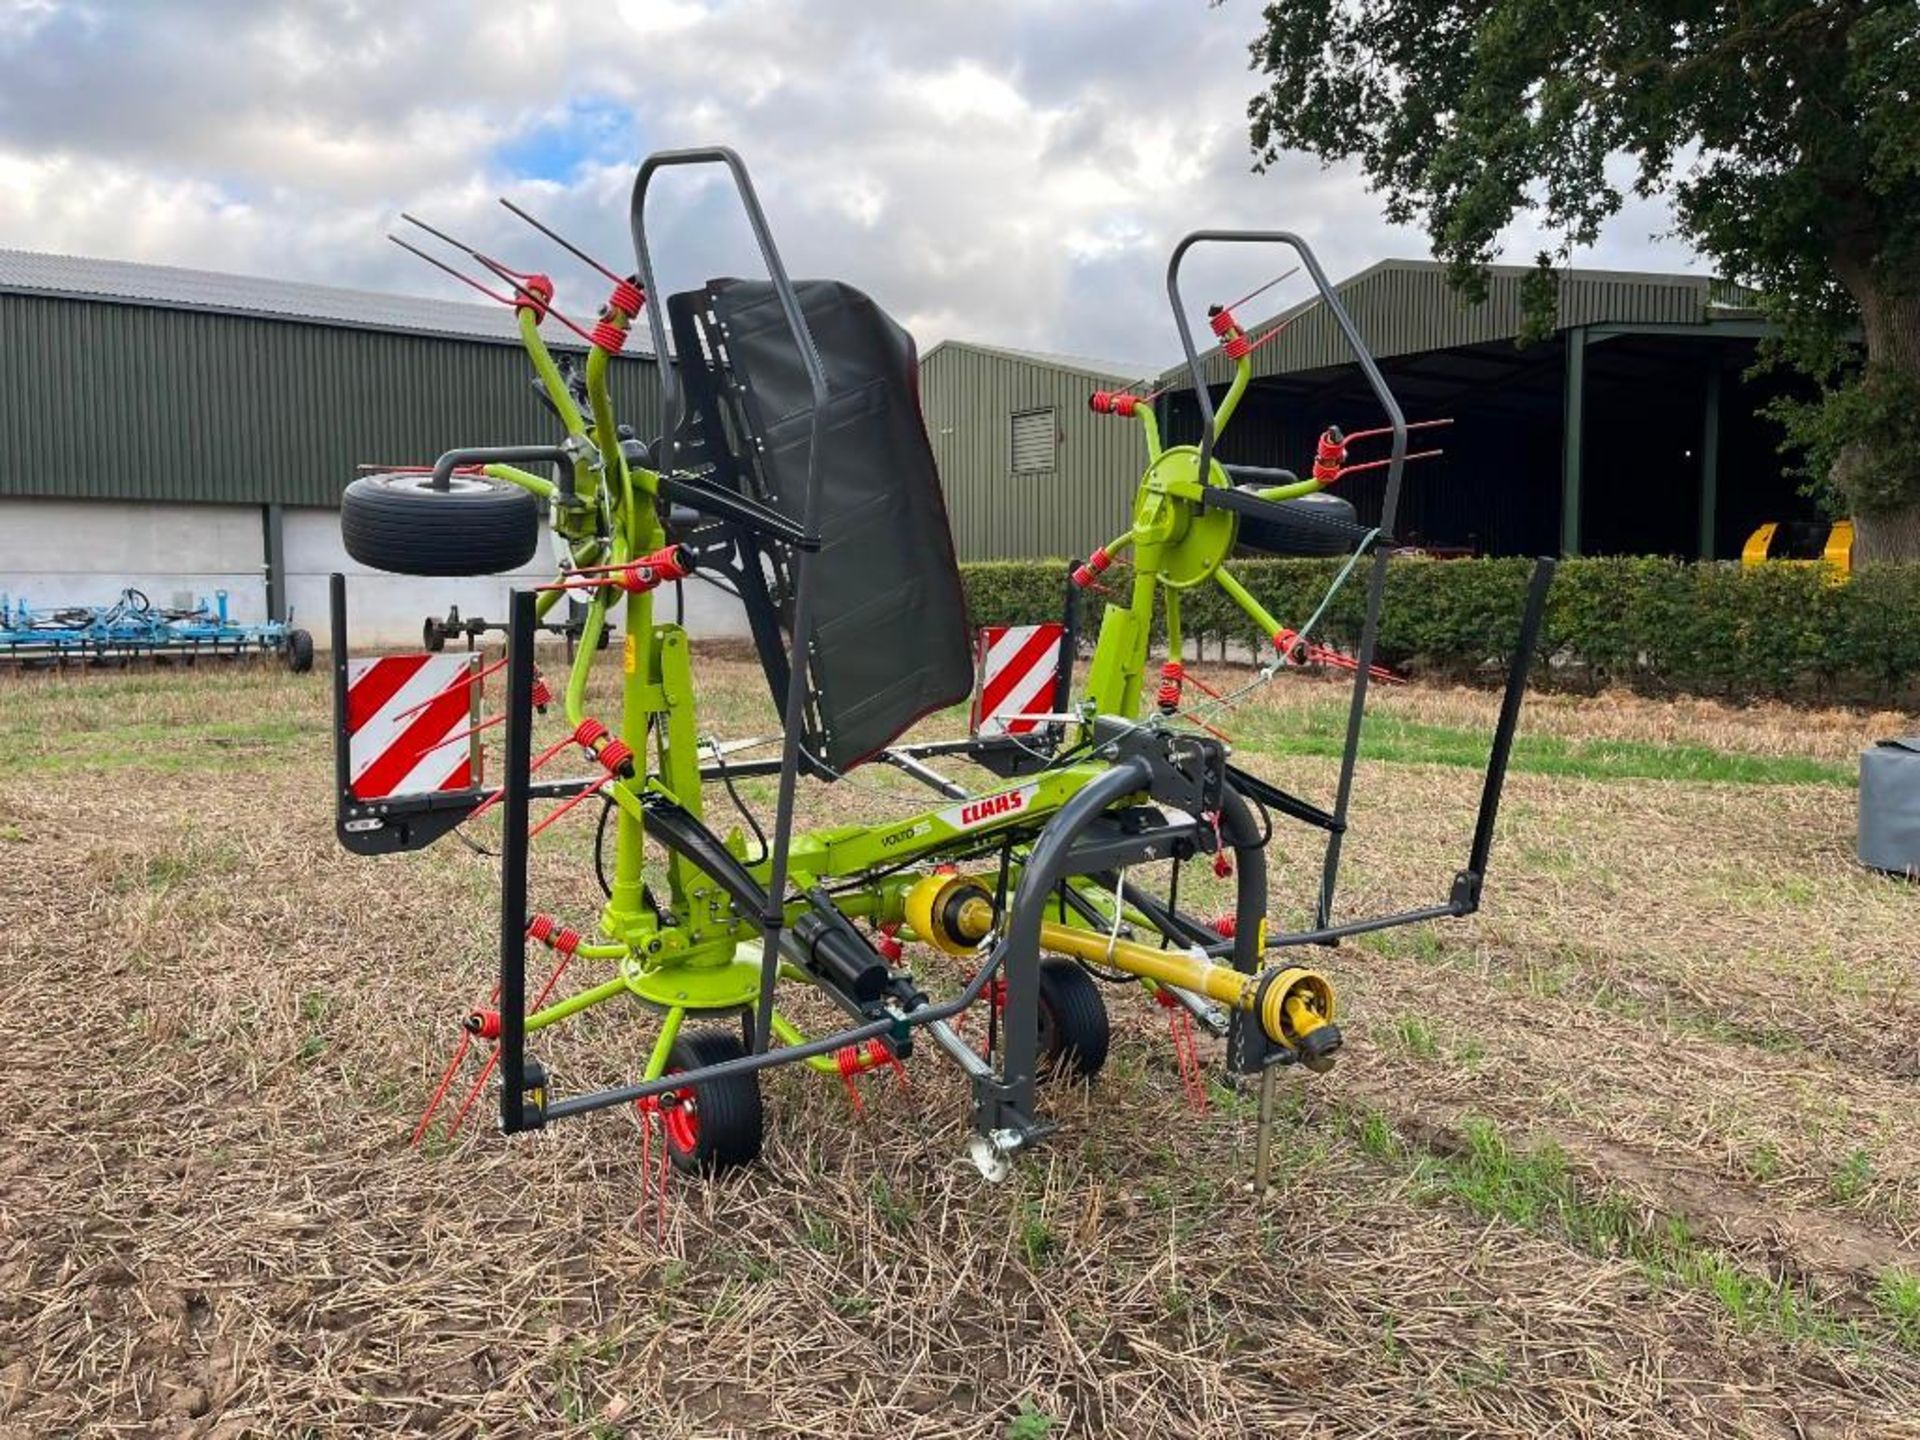 2019 Claas Volto 4 Rotor Tedder - Image 2 of 5